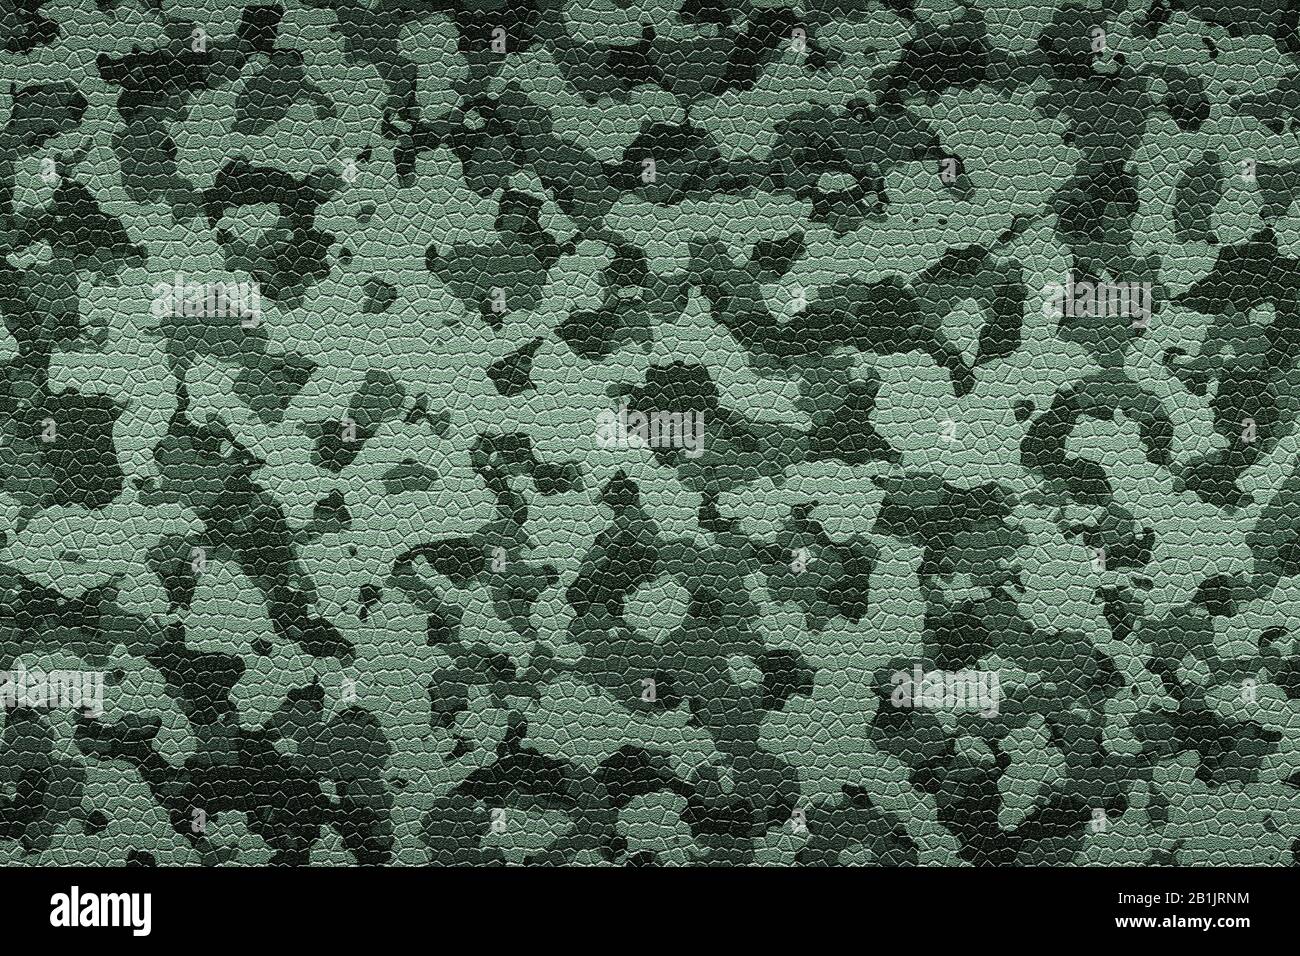 90,807 Yellow Camouflage Images, Stock Photos, 3D objects